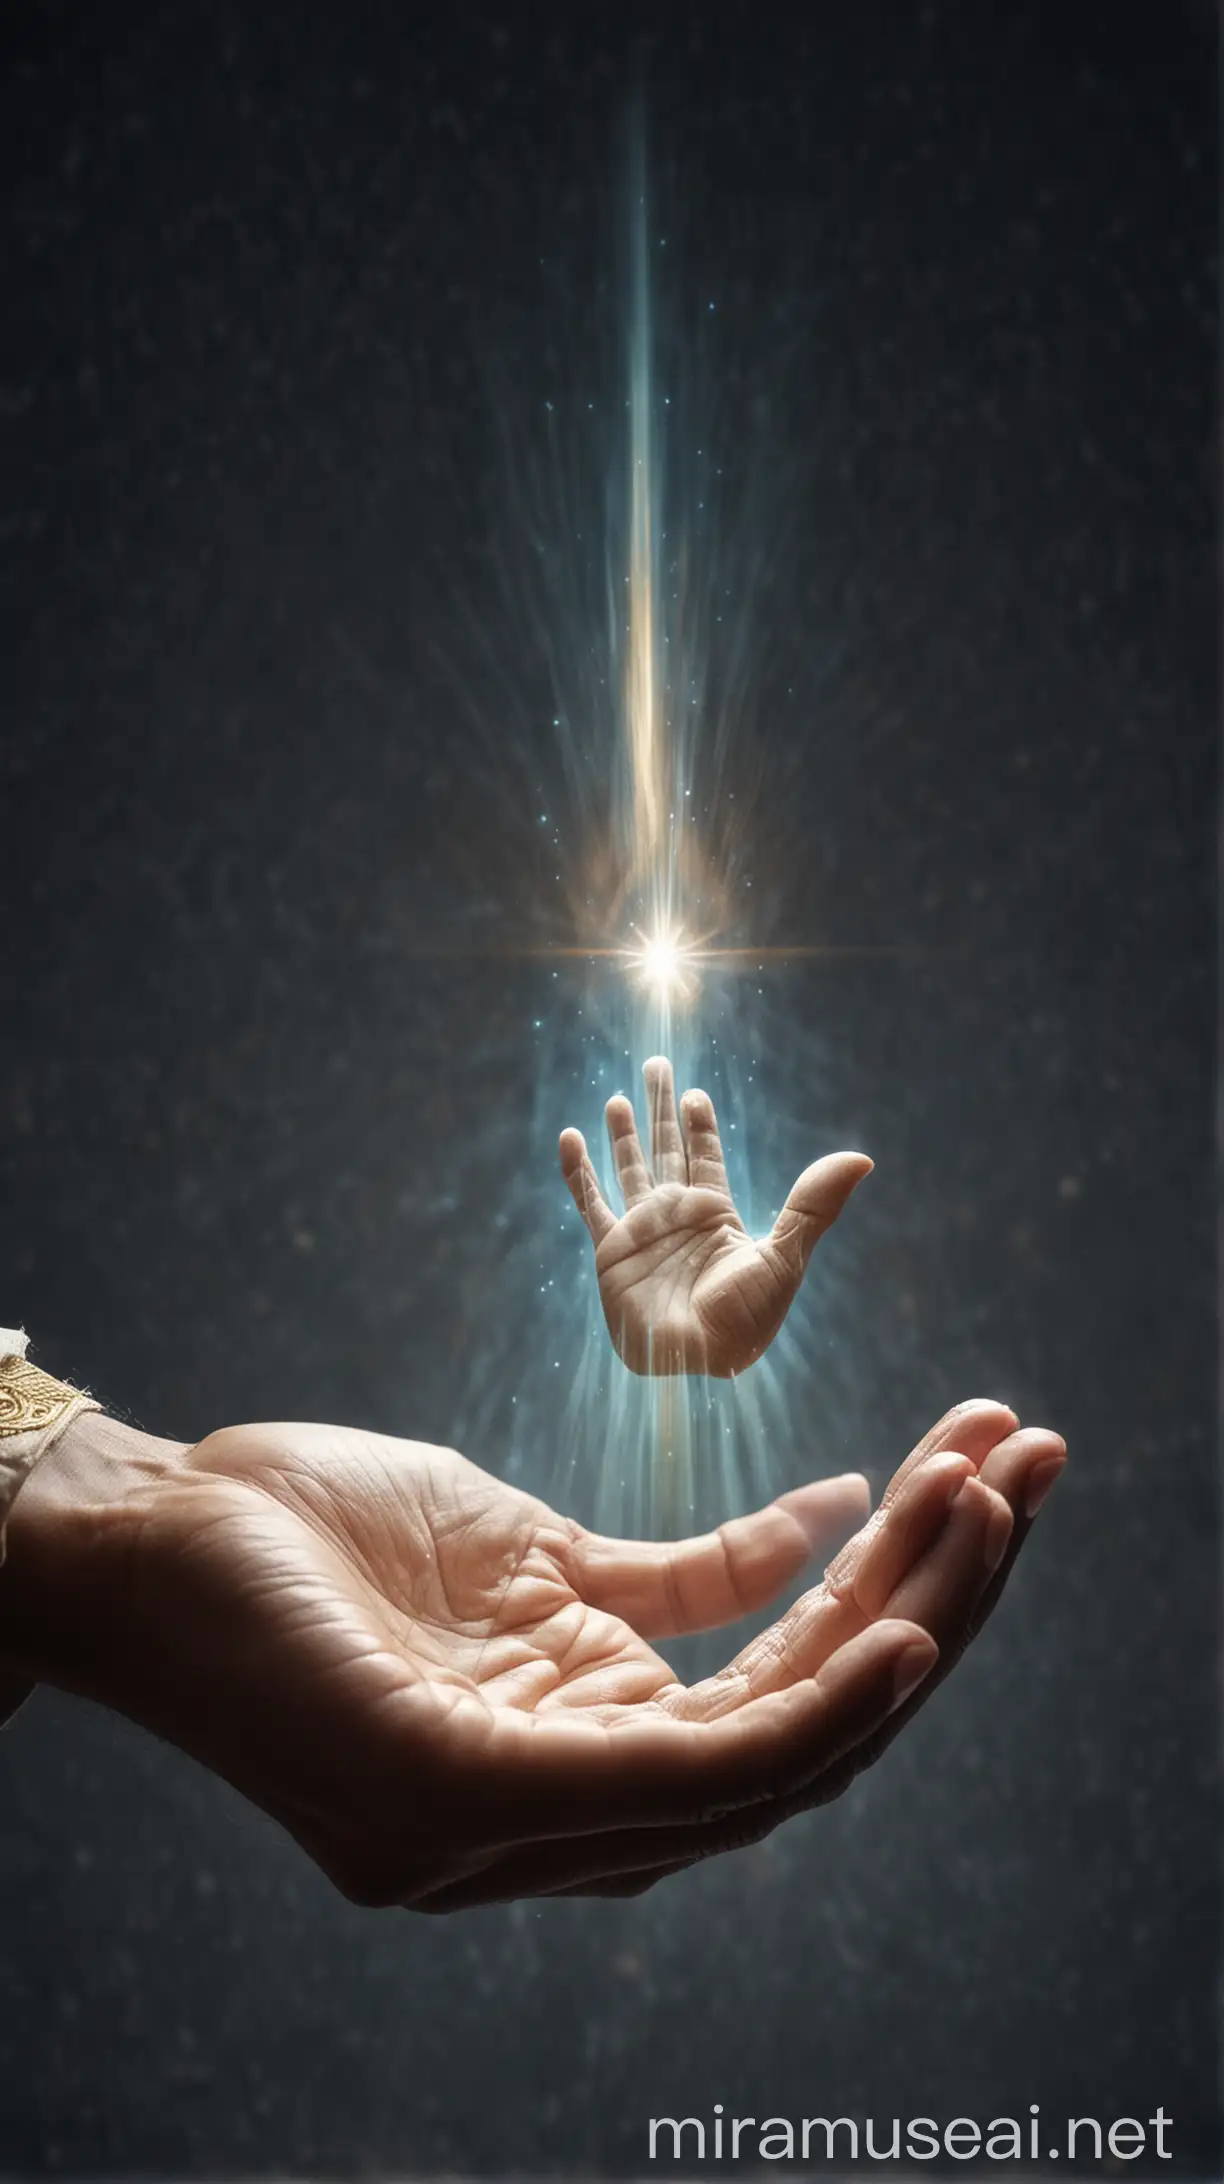 Compassionate Hand Offering Help with Glowing Aura